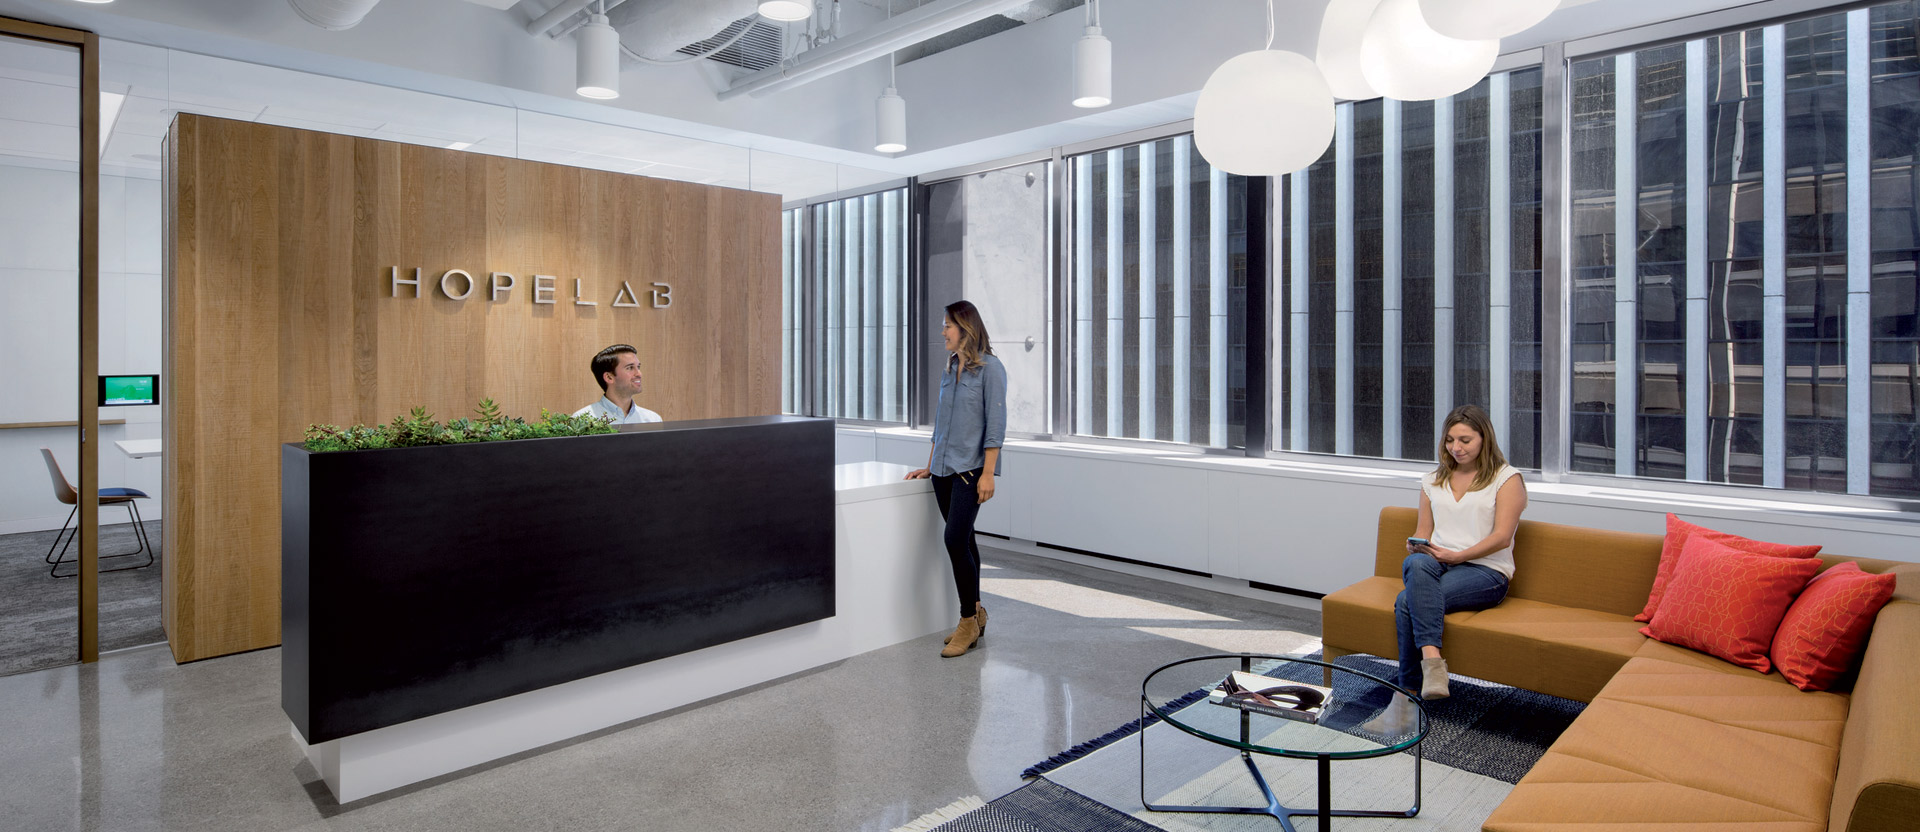 Spacious office reception area featuring a contemporary design with clean lines, an exposed ceiling, and modern pendant lighting. A wooden panel with the company's name complements the industrial background while greenery adds a natural touch. Comfortable seating arrangements invite casual interactions among the individuals present.